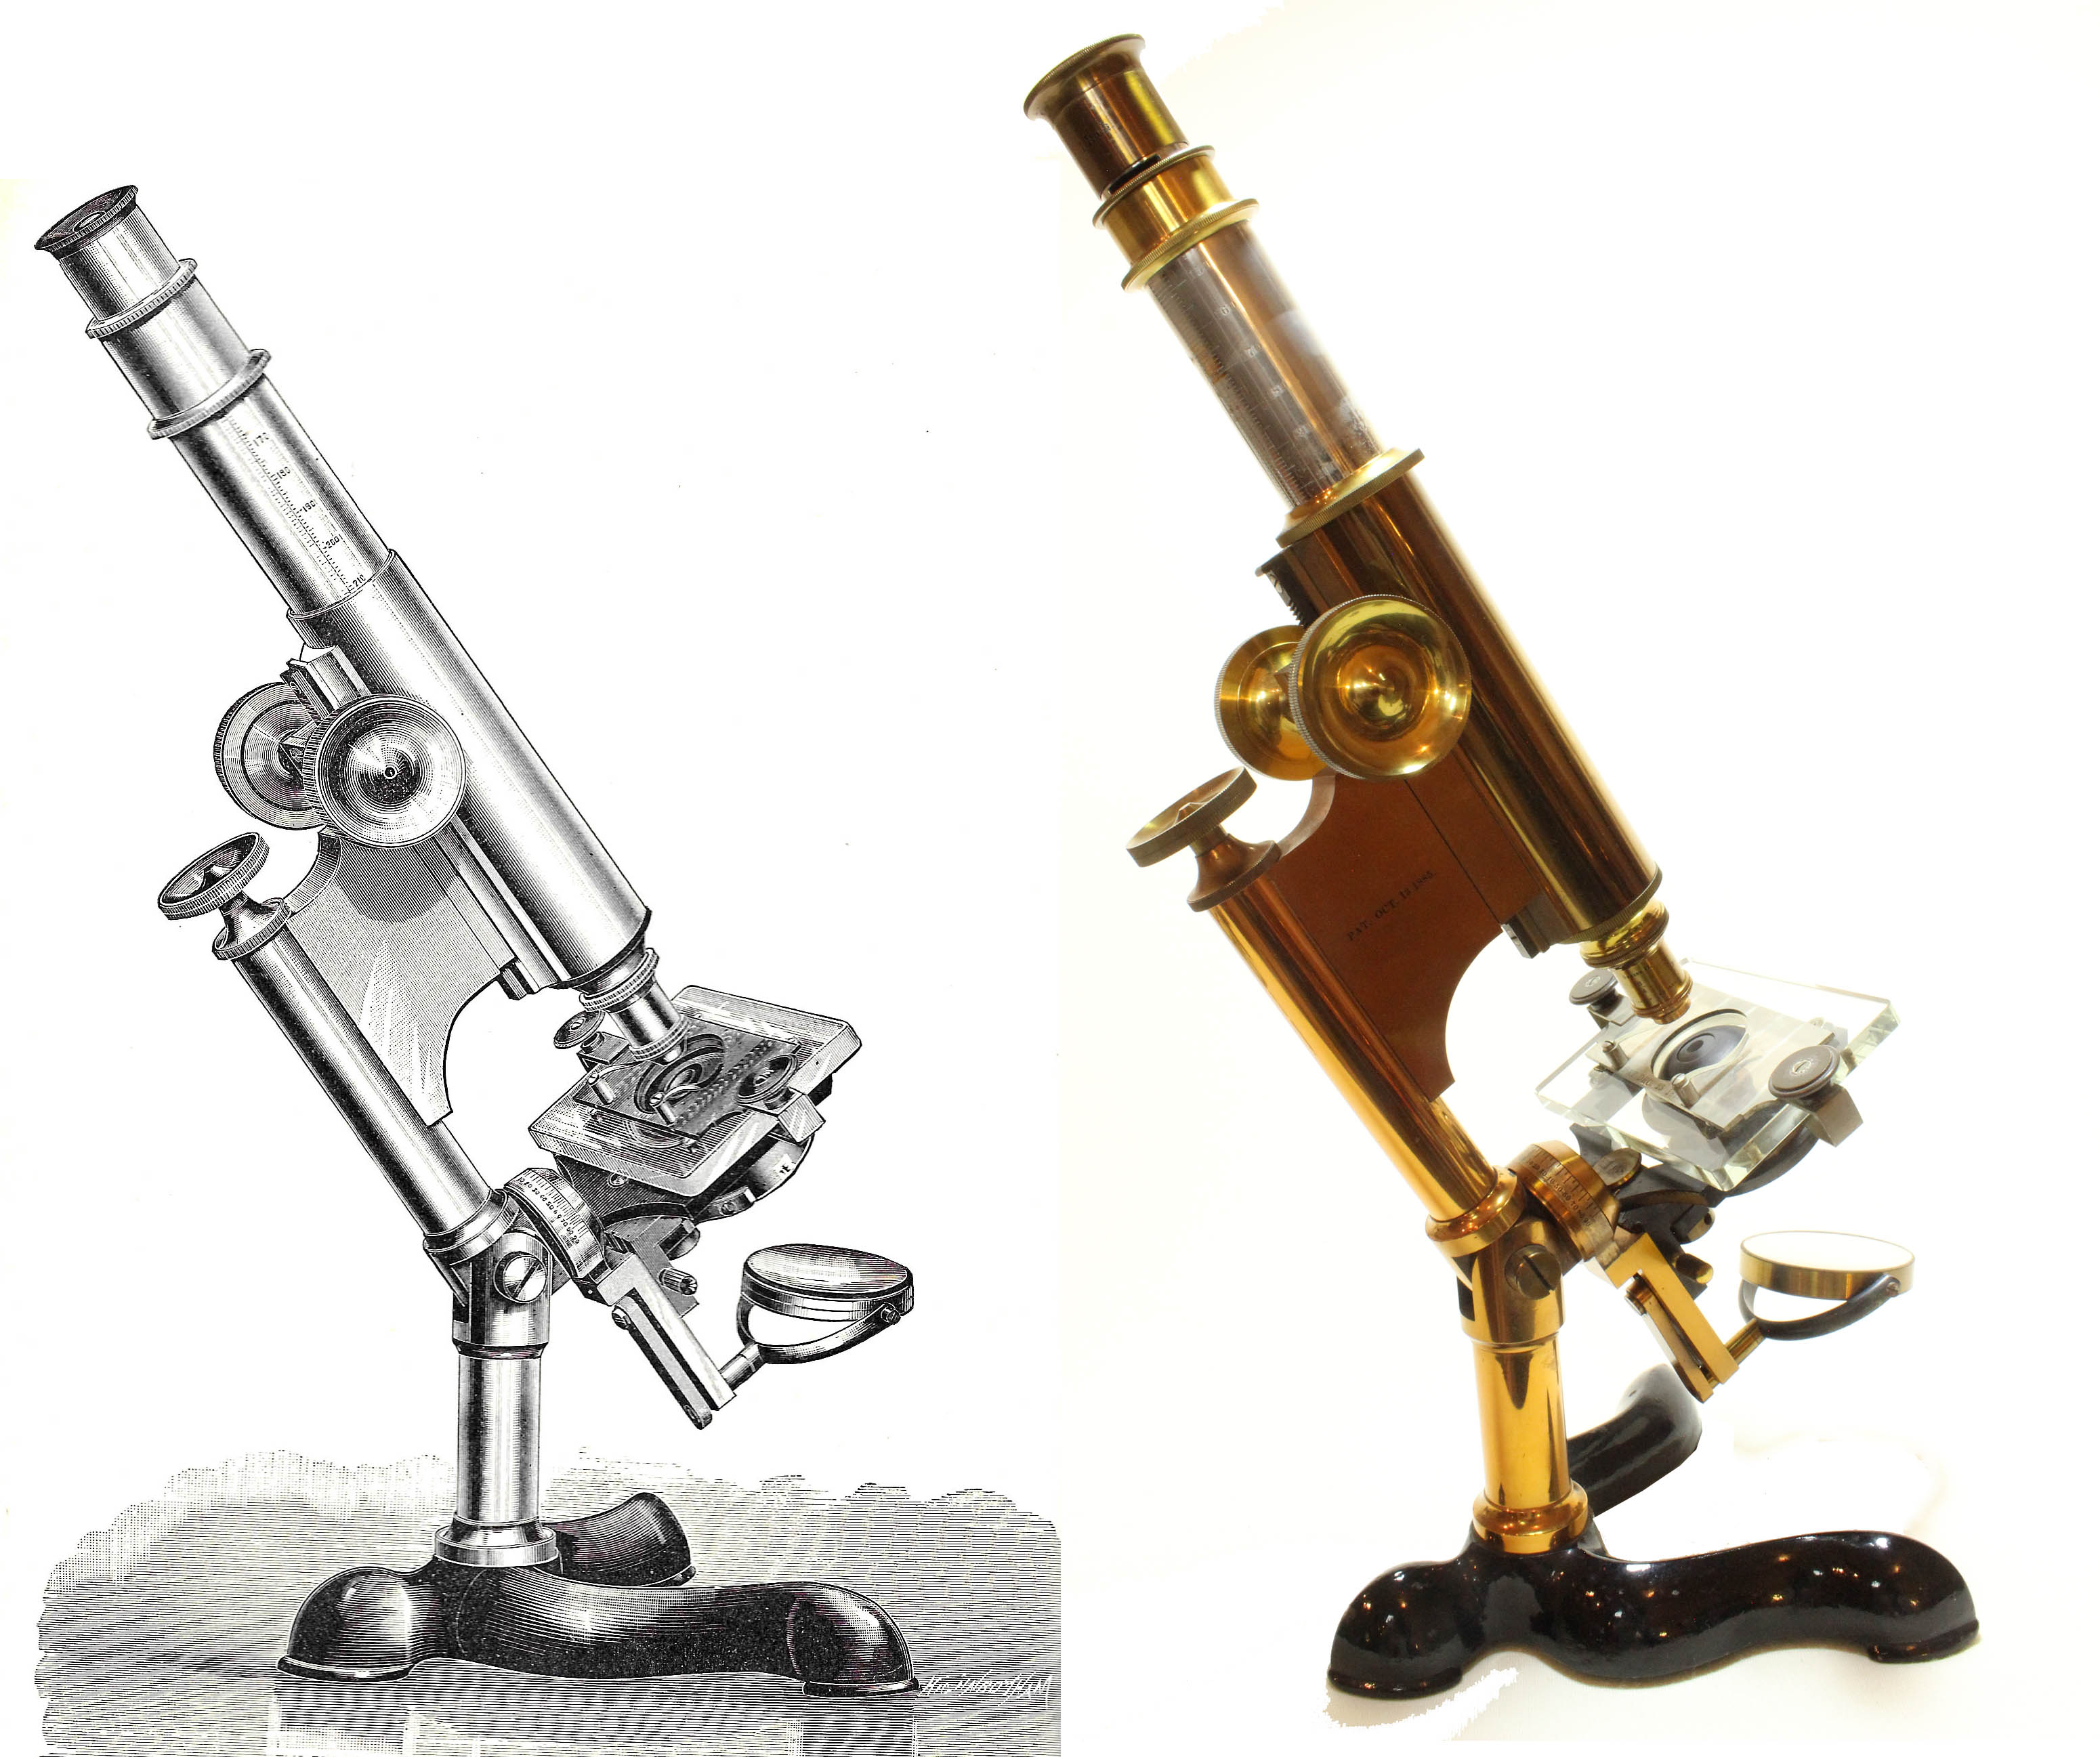 Physician's Microscope with engraving